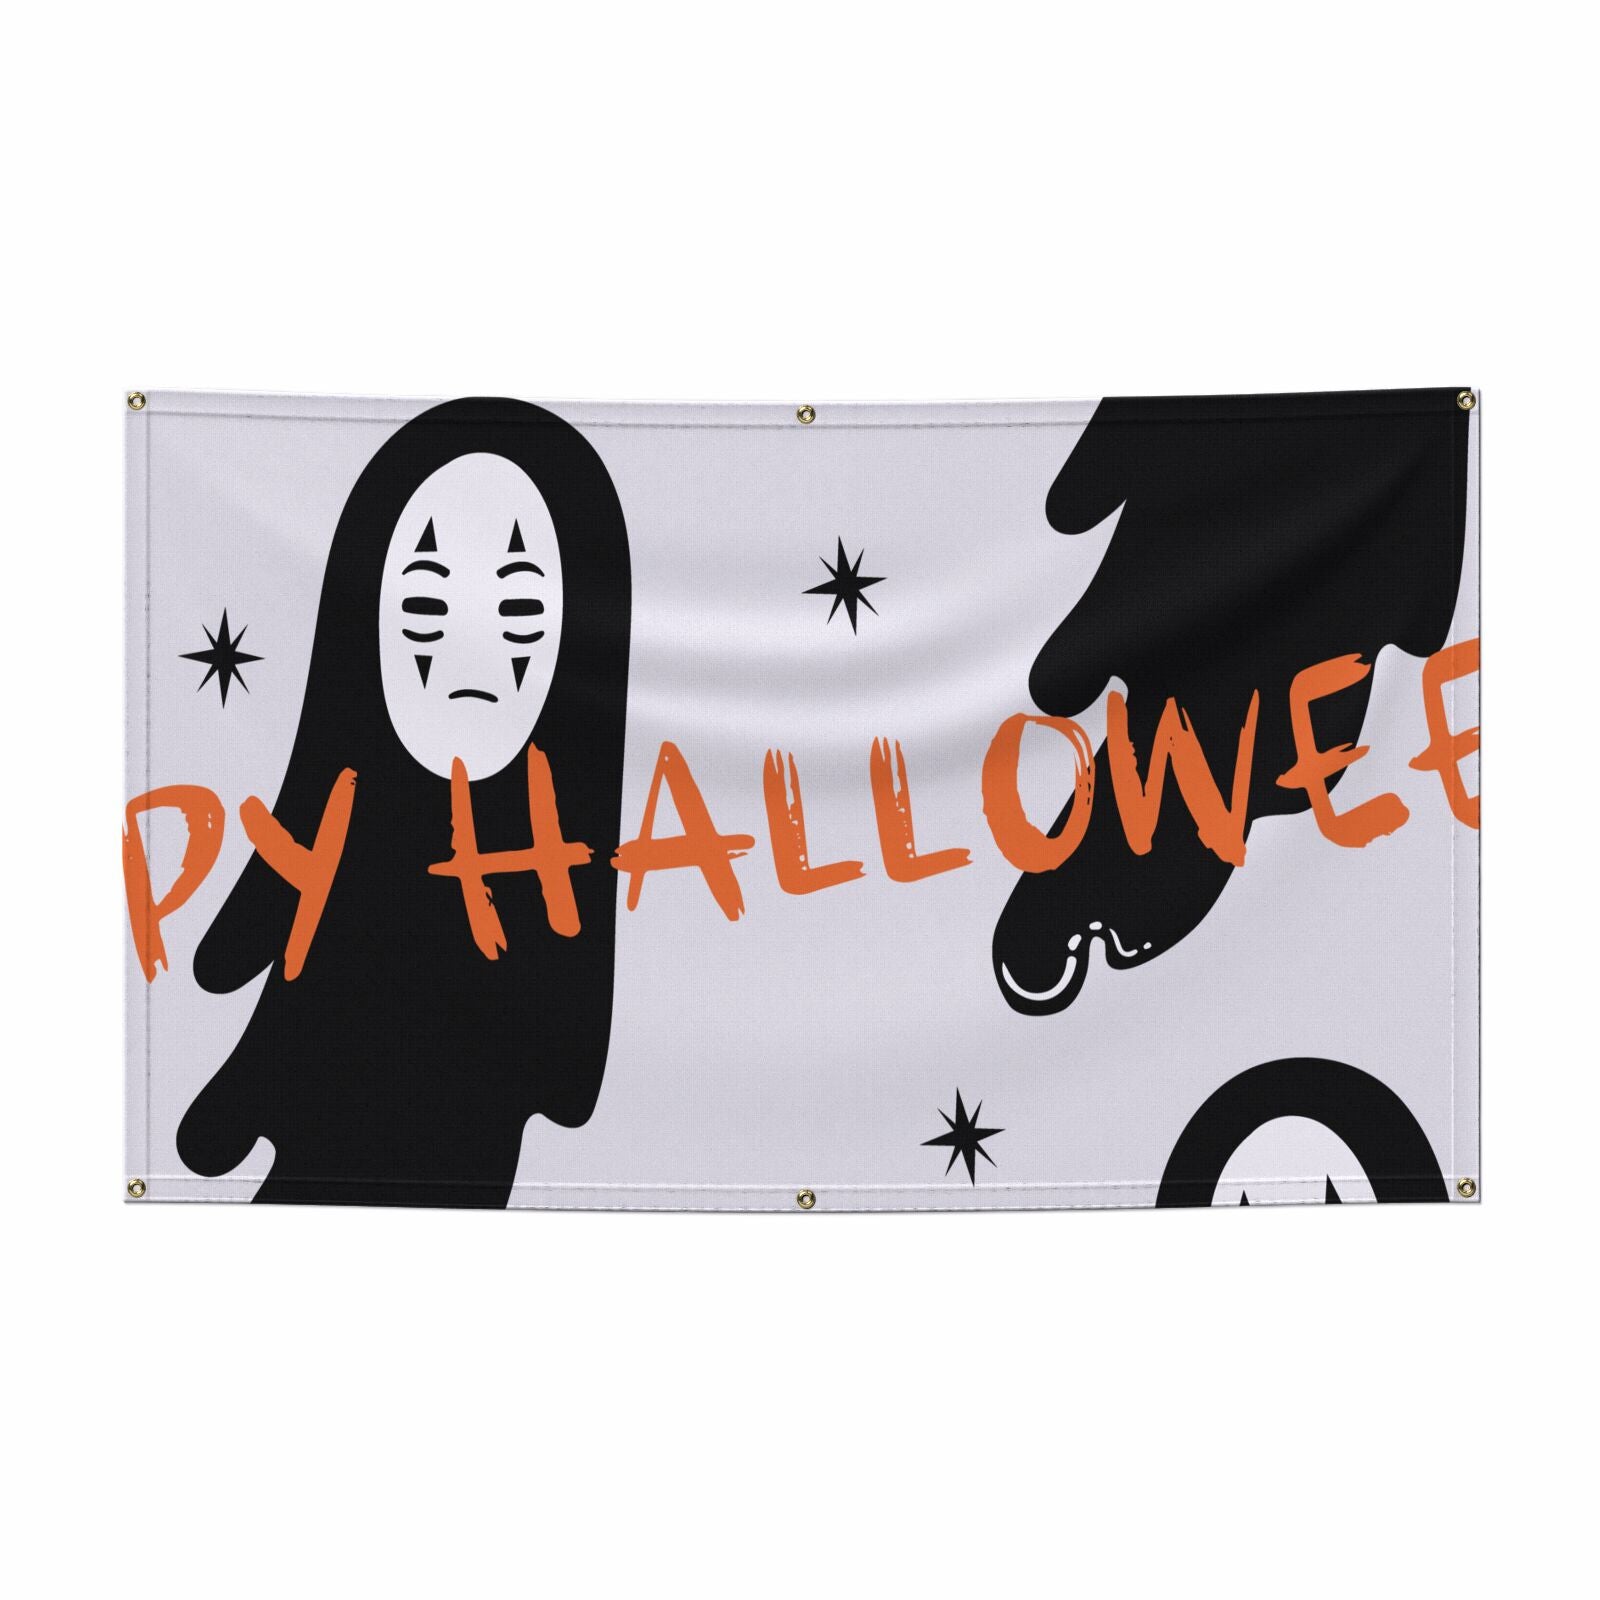 Ghostly Halloween Photo 5x3 Vinly Banner with Grommets